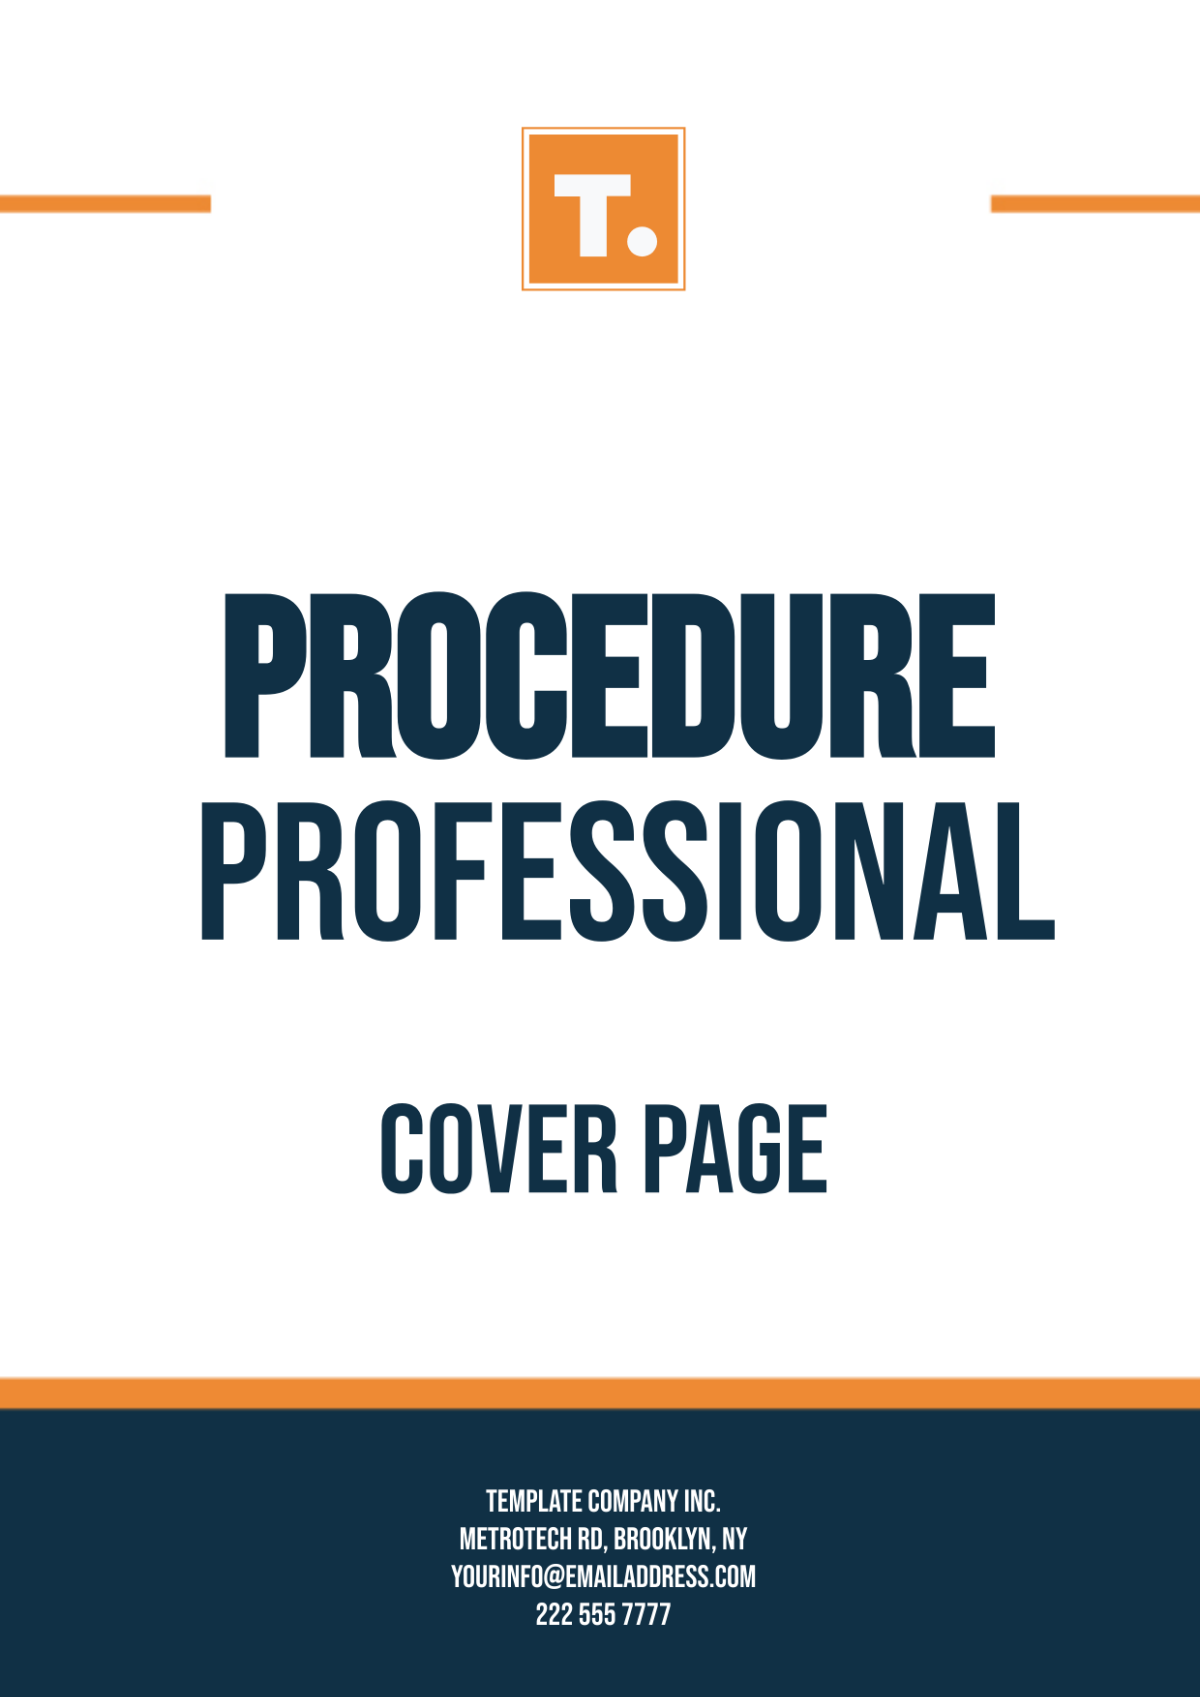 Procedure Professional Cover Page